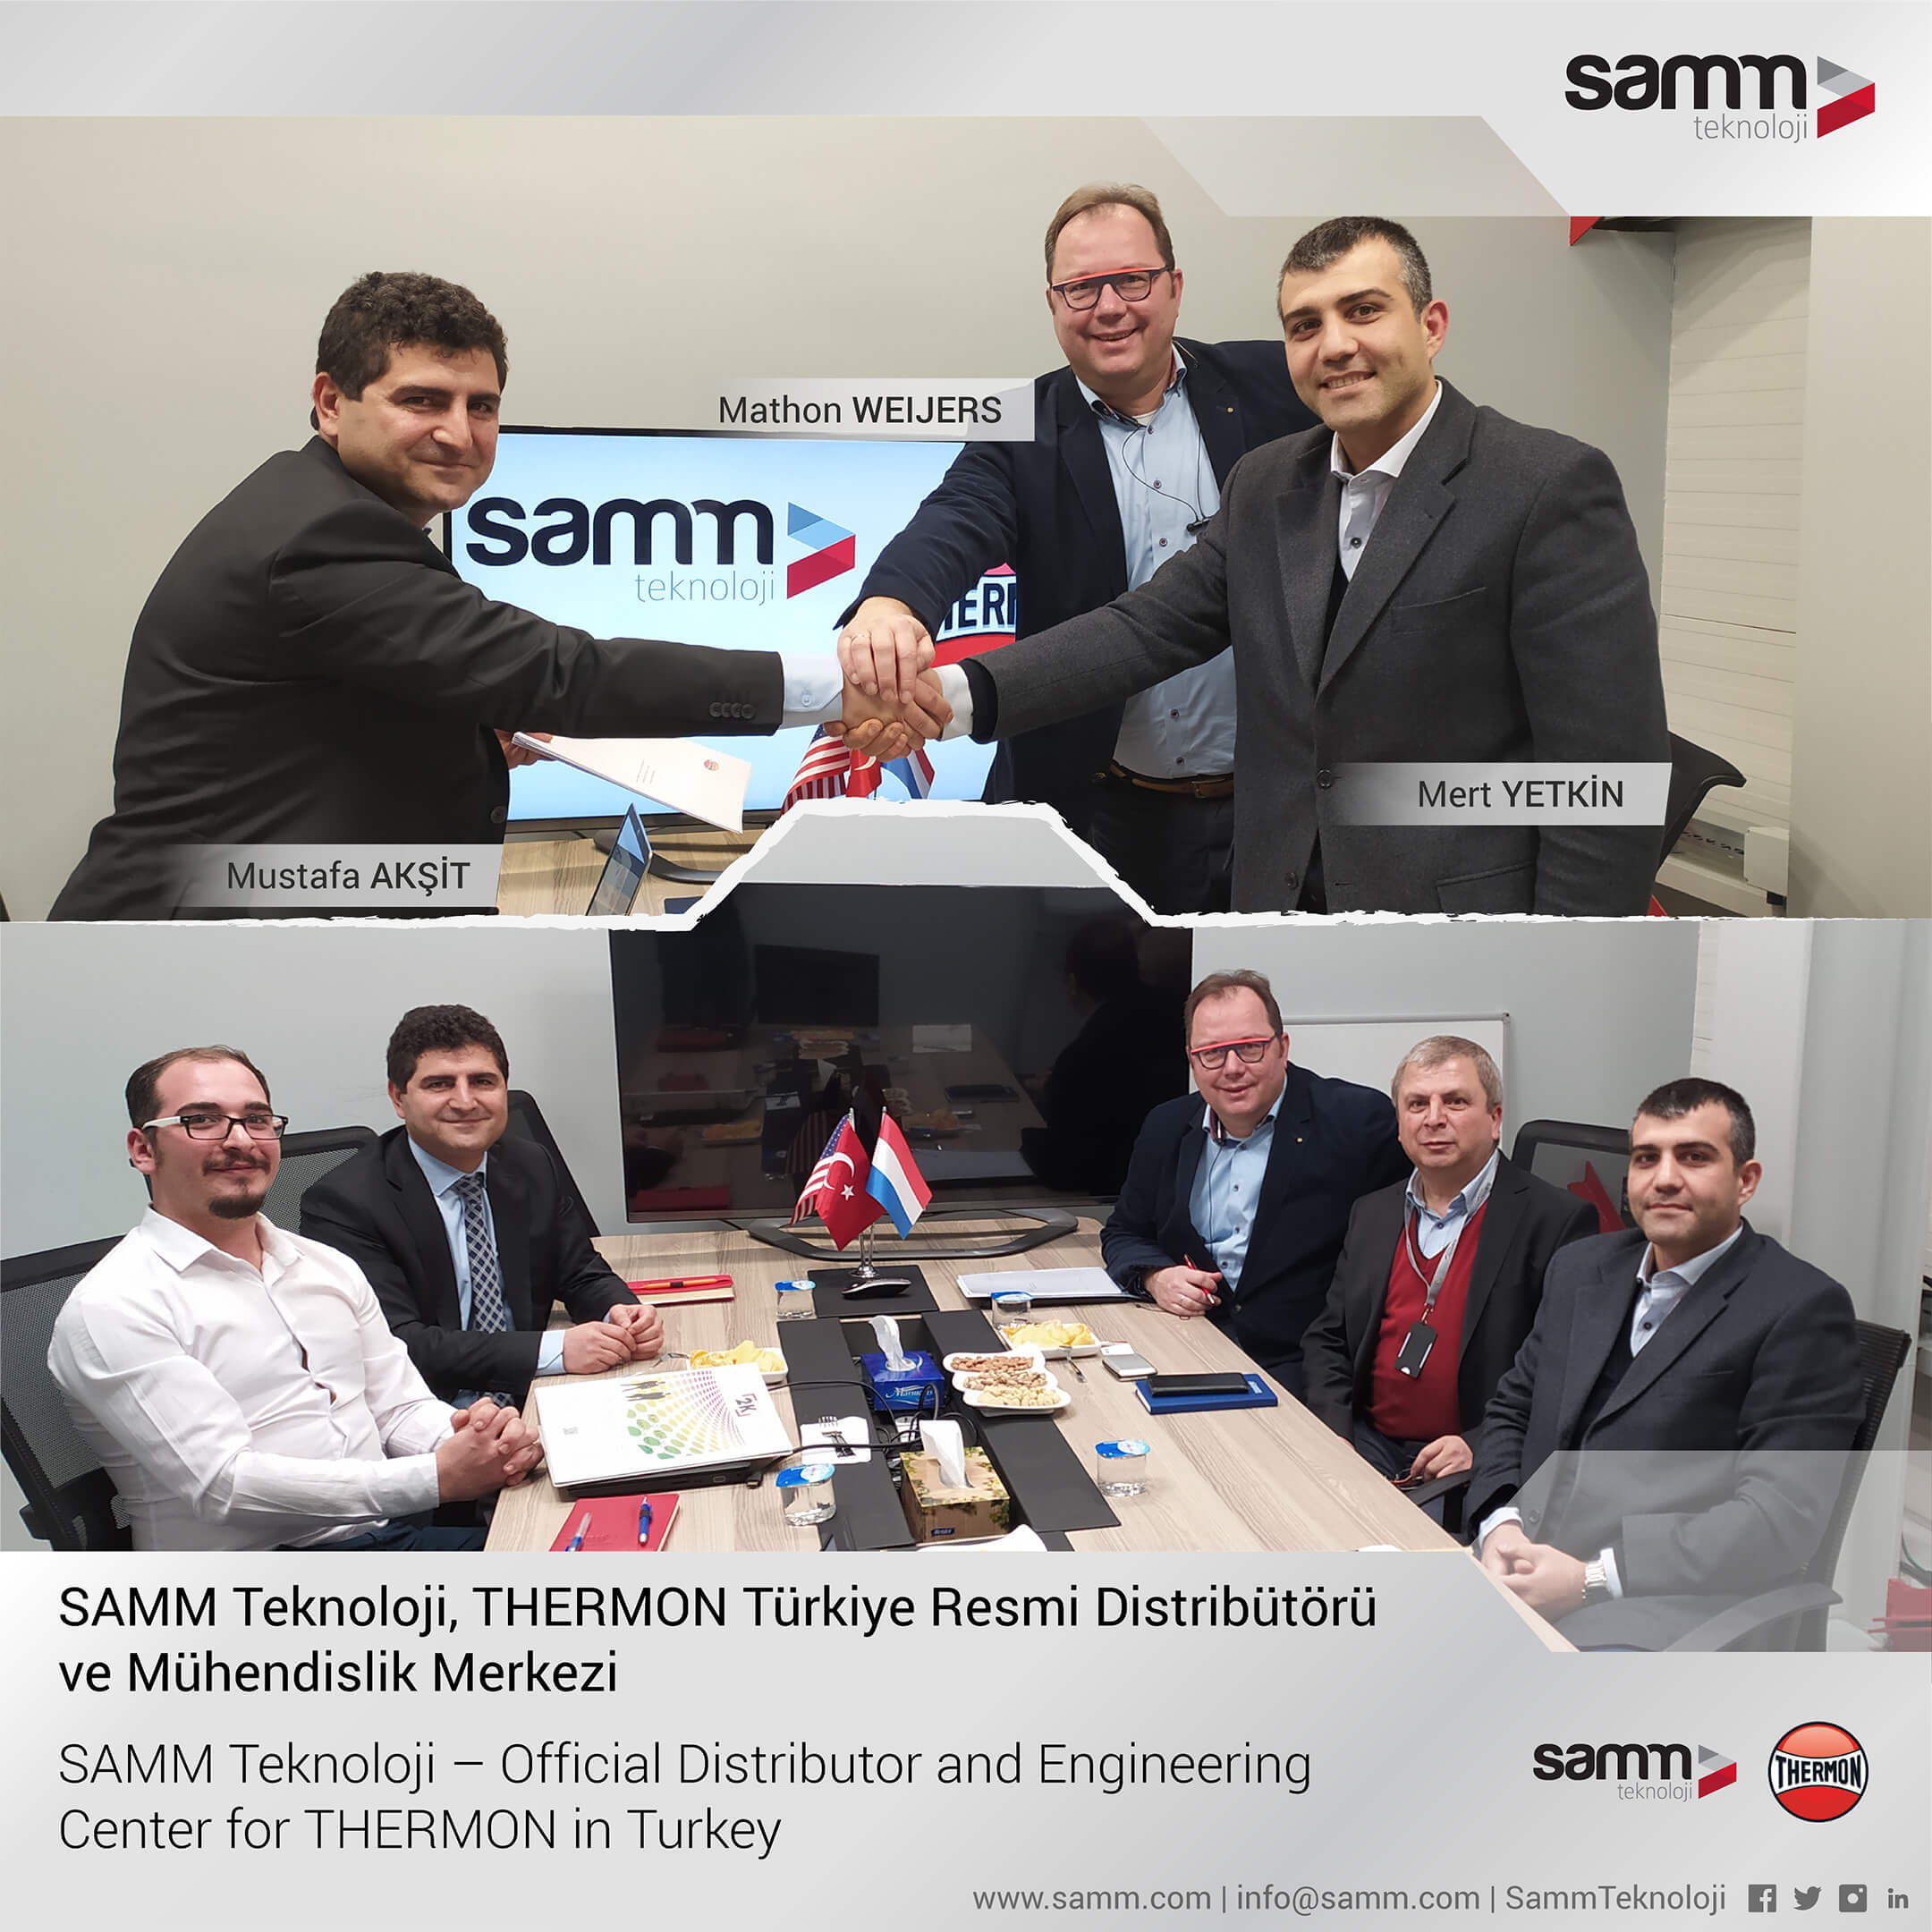 SAMM Teknoloji, The Official Distributor and Engineering Center for Thermon in Turkey 1